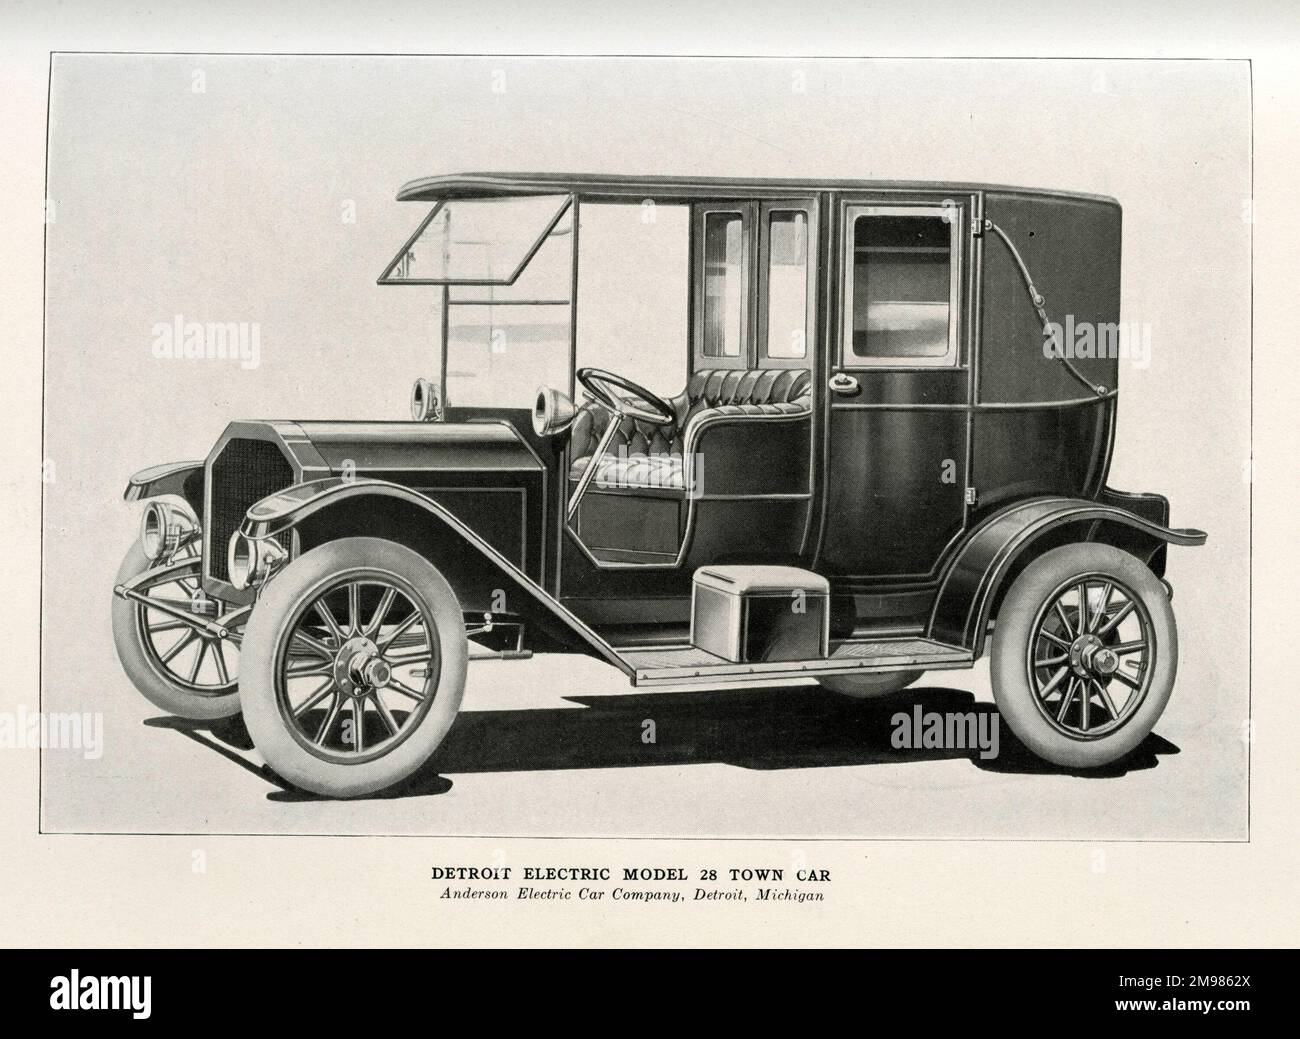 Detroit Electric Model 28 Town Car, Anderson Electric Car Company